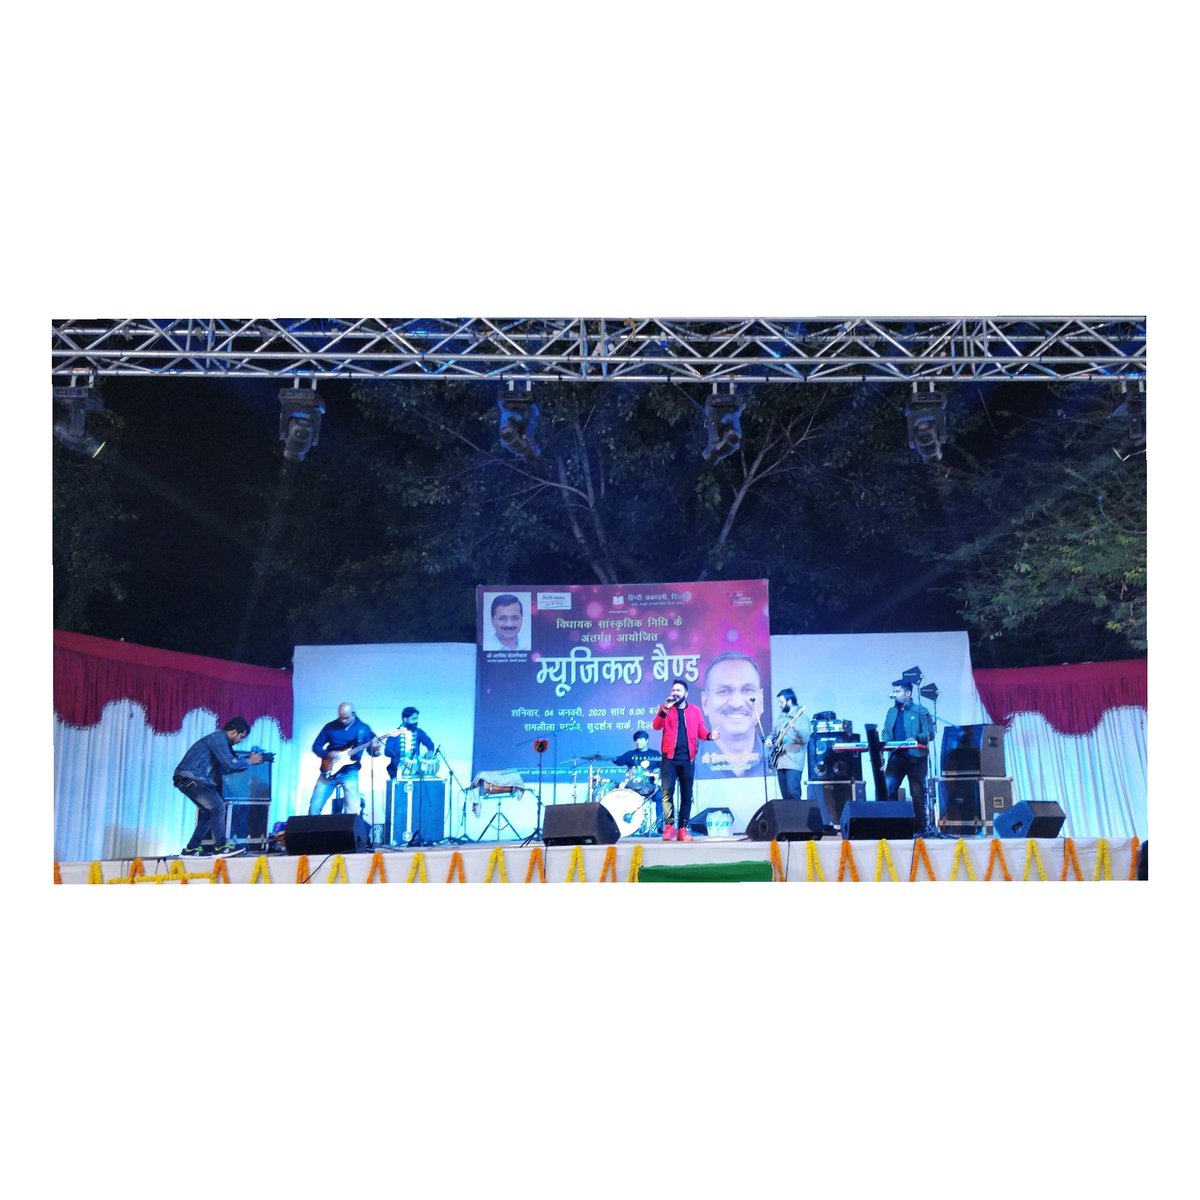 Setup for tonight !!! 🎶

Concert for common people. Organised by Delhi Government.
Thanks to @ArvindKejriwal @AamAadmiParty @msisodia @shivcharangoel
Artist managed by @YoursEventfully 
#MayaBazaarband #mayabazaarlive #SudhirYaduvanshi #aap #amazingevening #thankyou